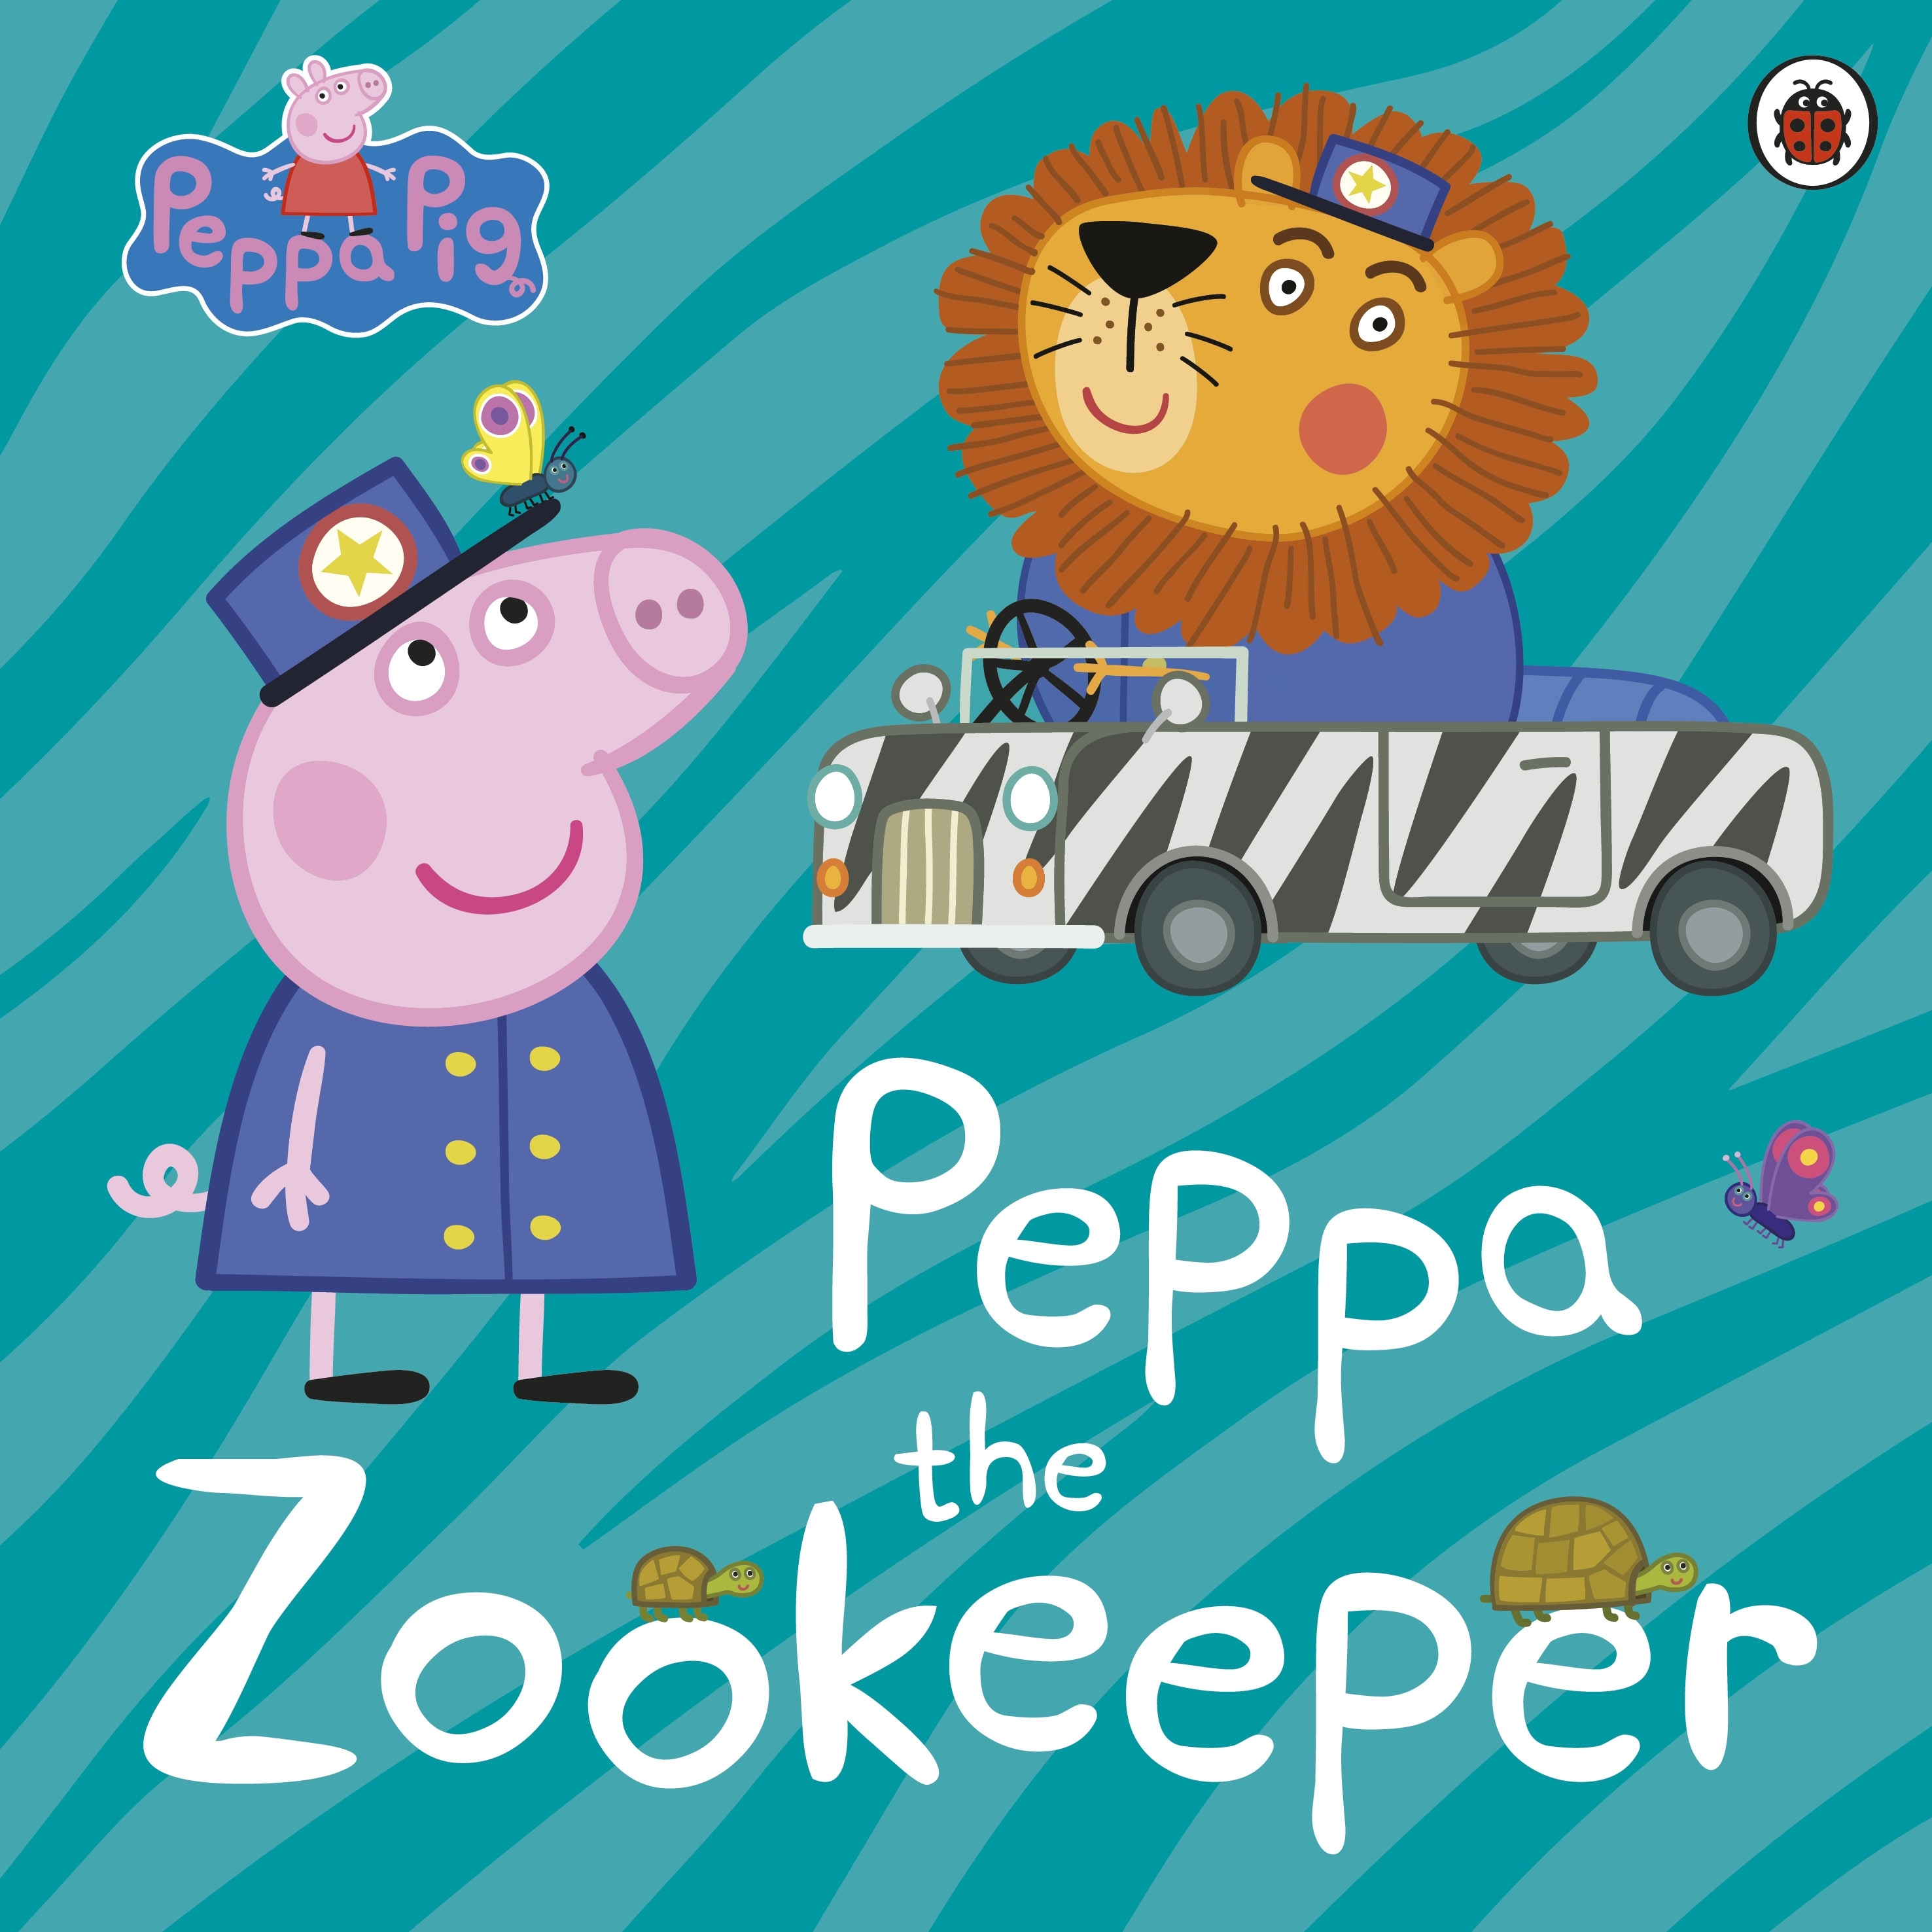 PEPPA PIG: PEPPA THE ZOOKEEPER PICTURE BOOK